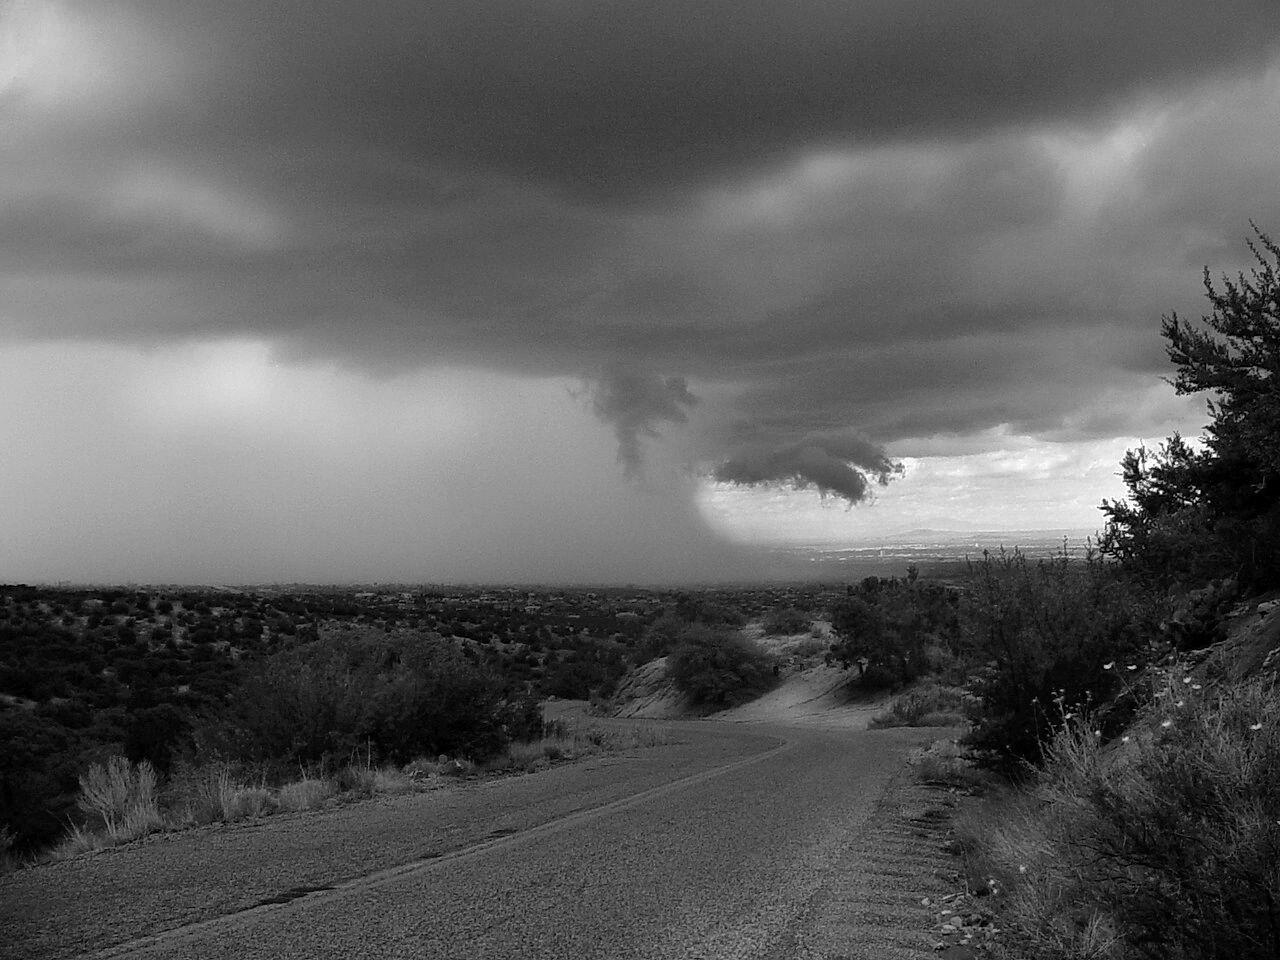 Storm in New Mexico, New Mexico Water Science Center